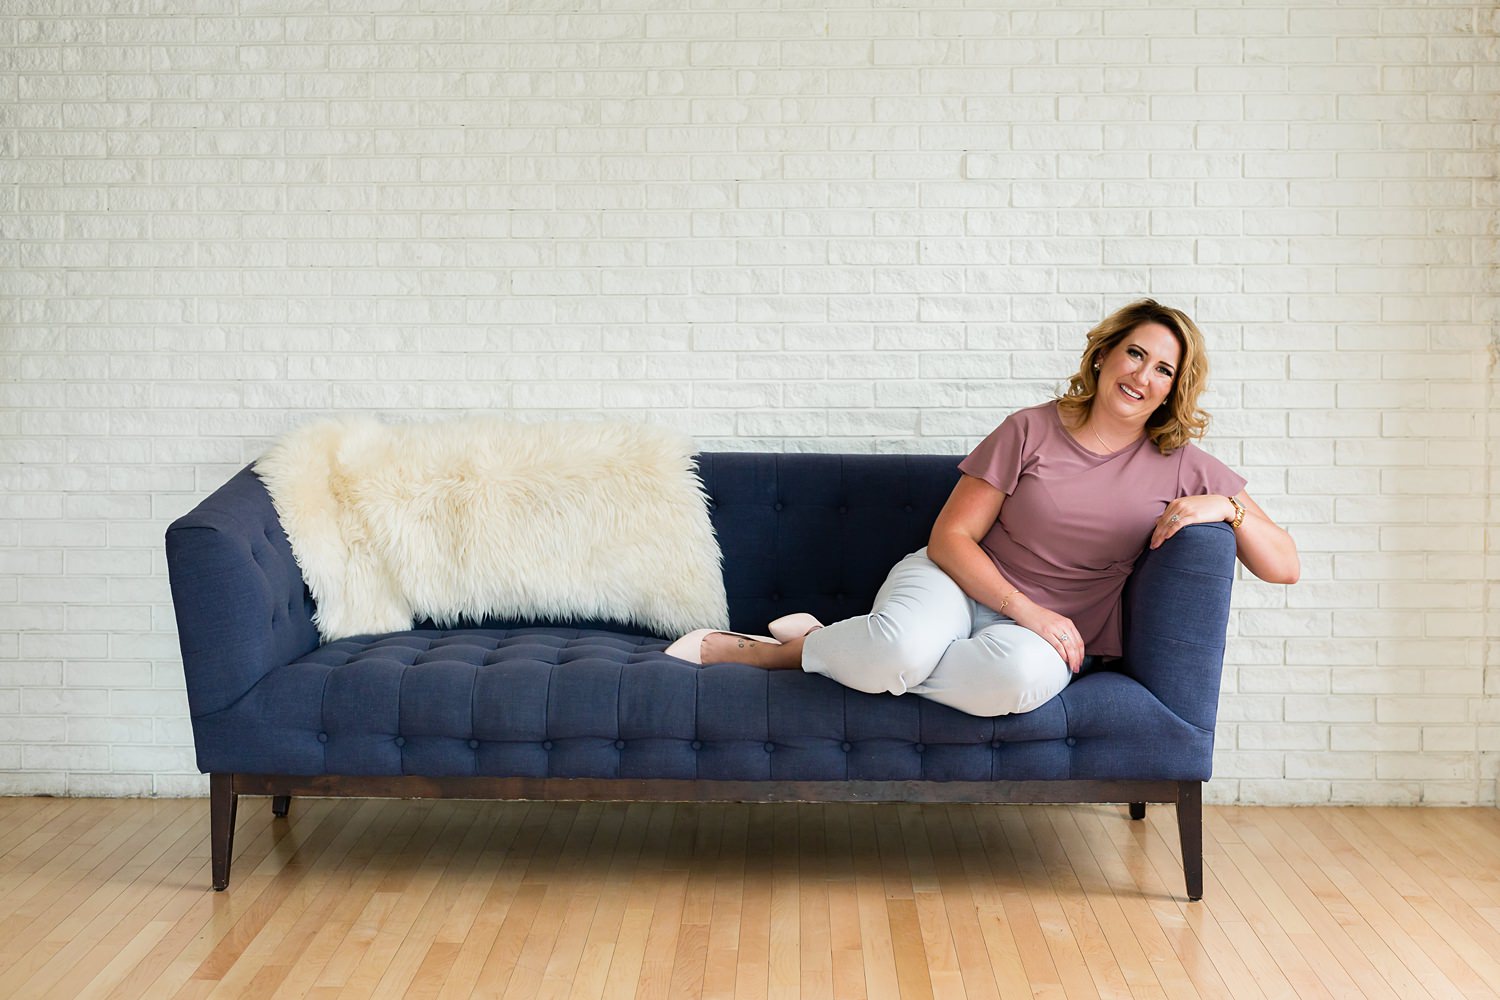 professional woman sitting on blue couch